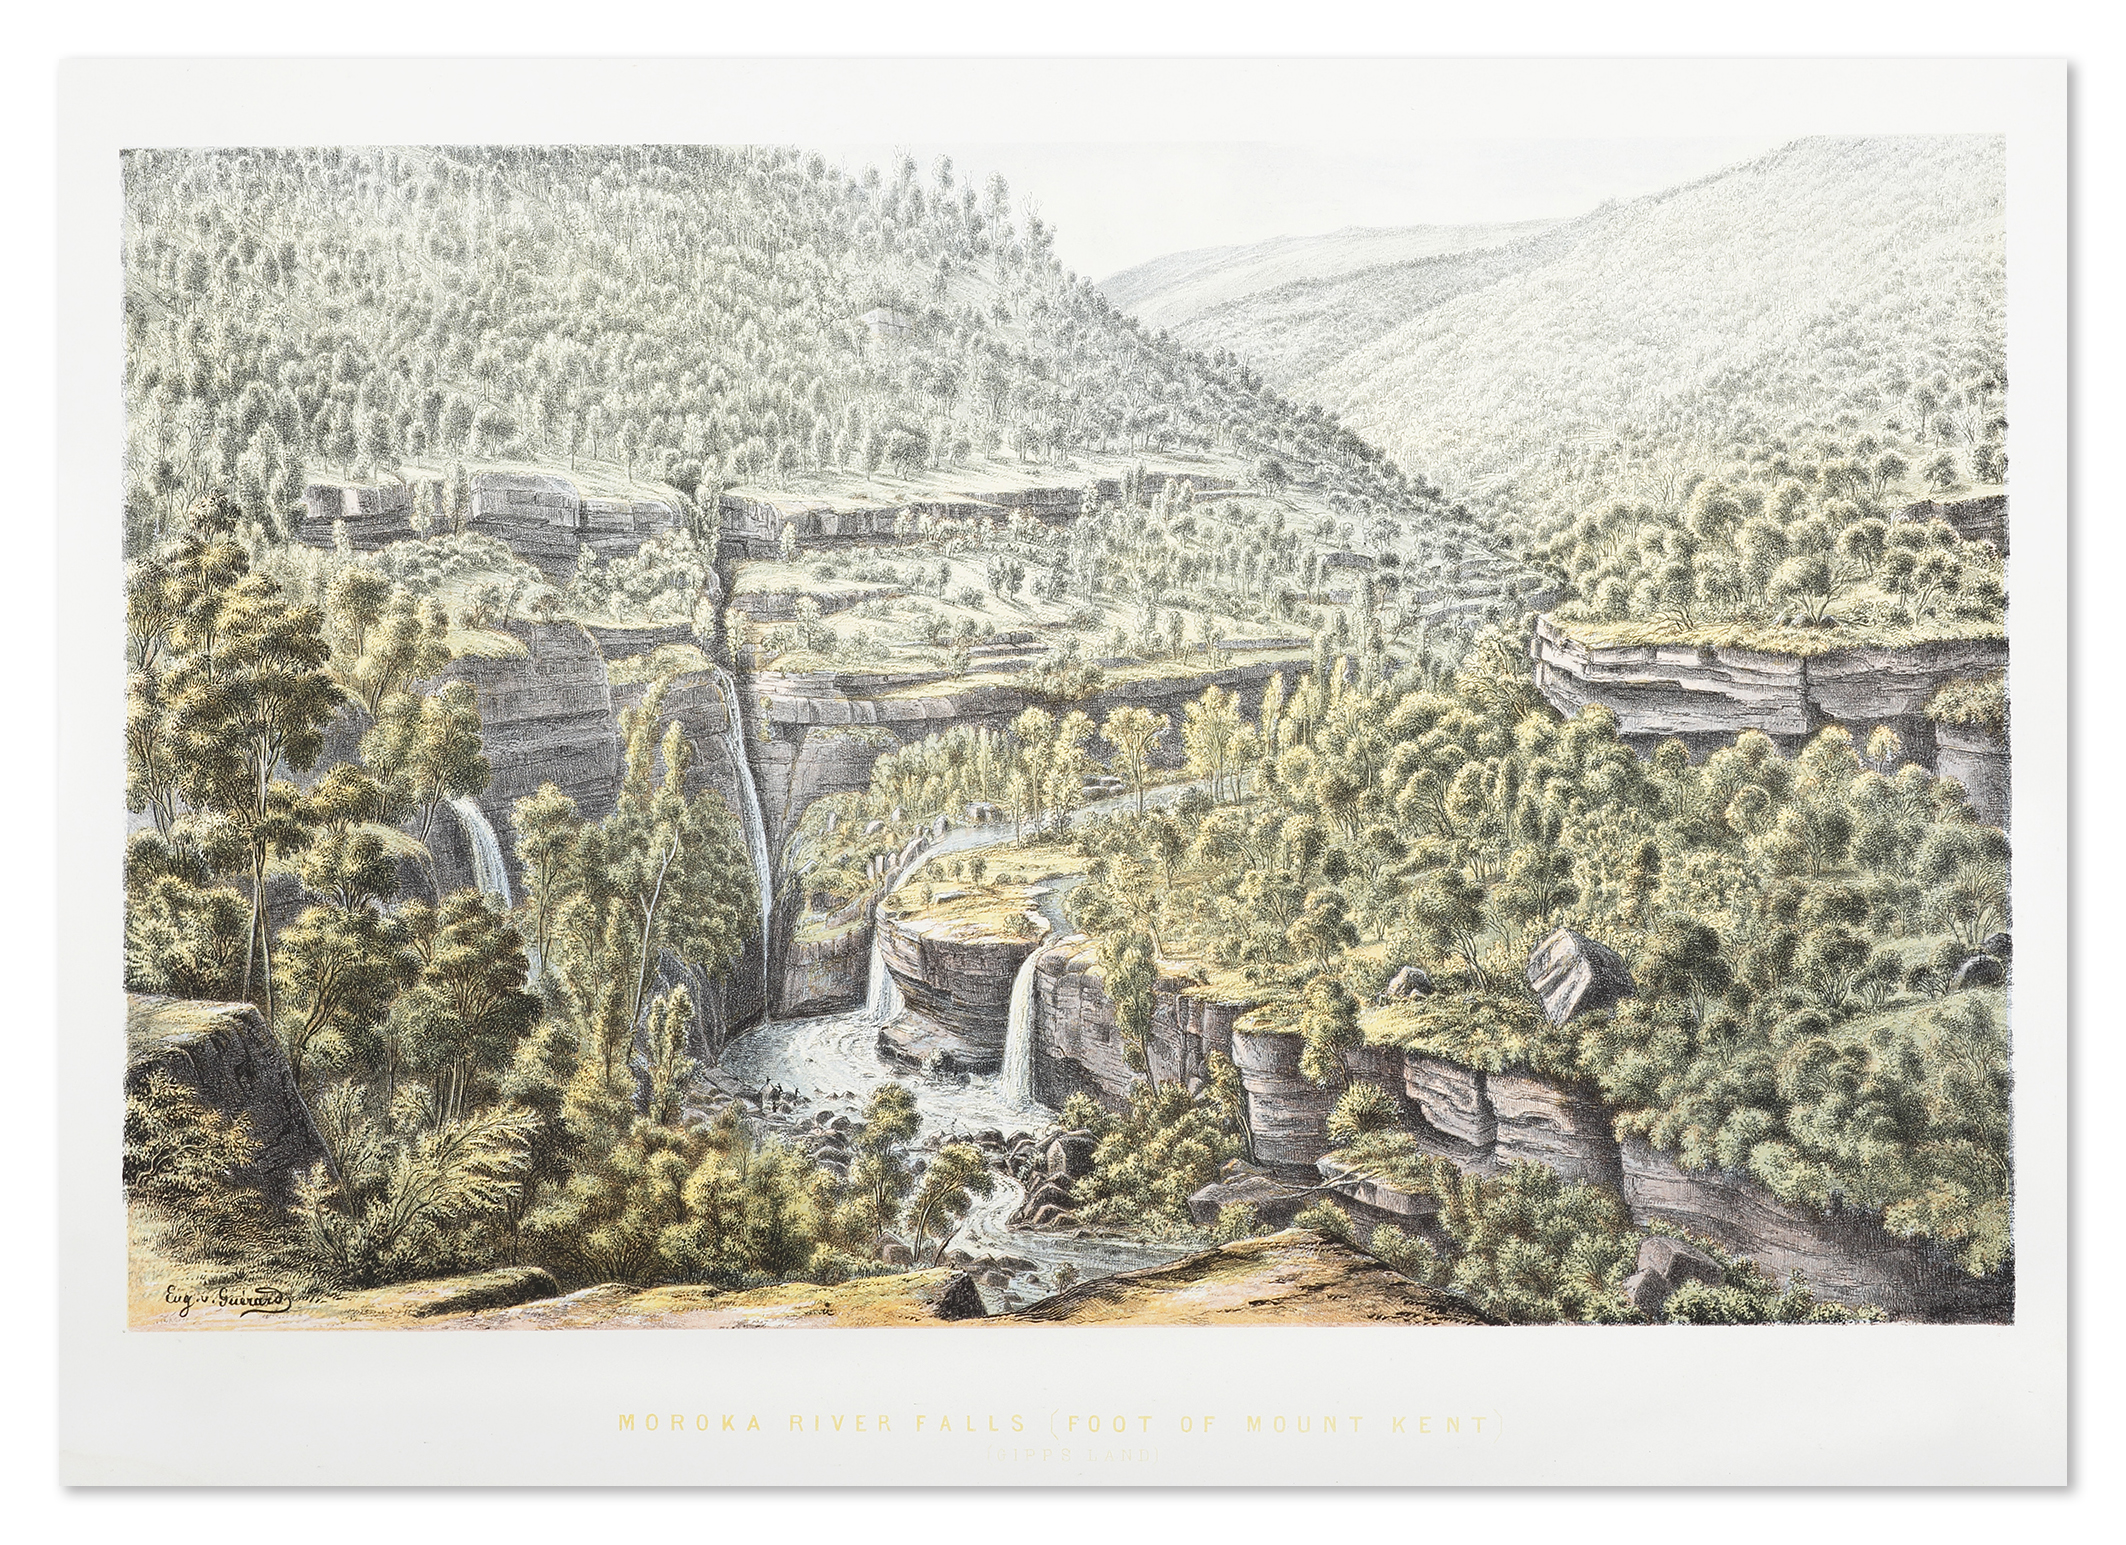 Moroka River Falls, foot of Mount Kent, Gipps Land. - Antique View from 1867